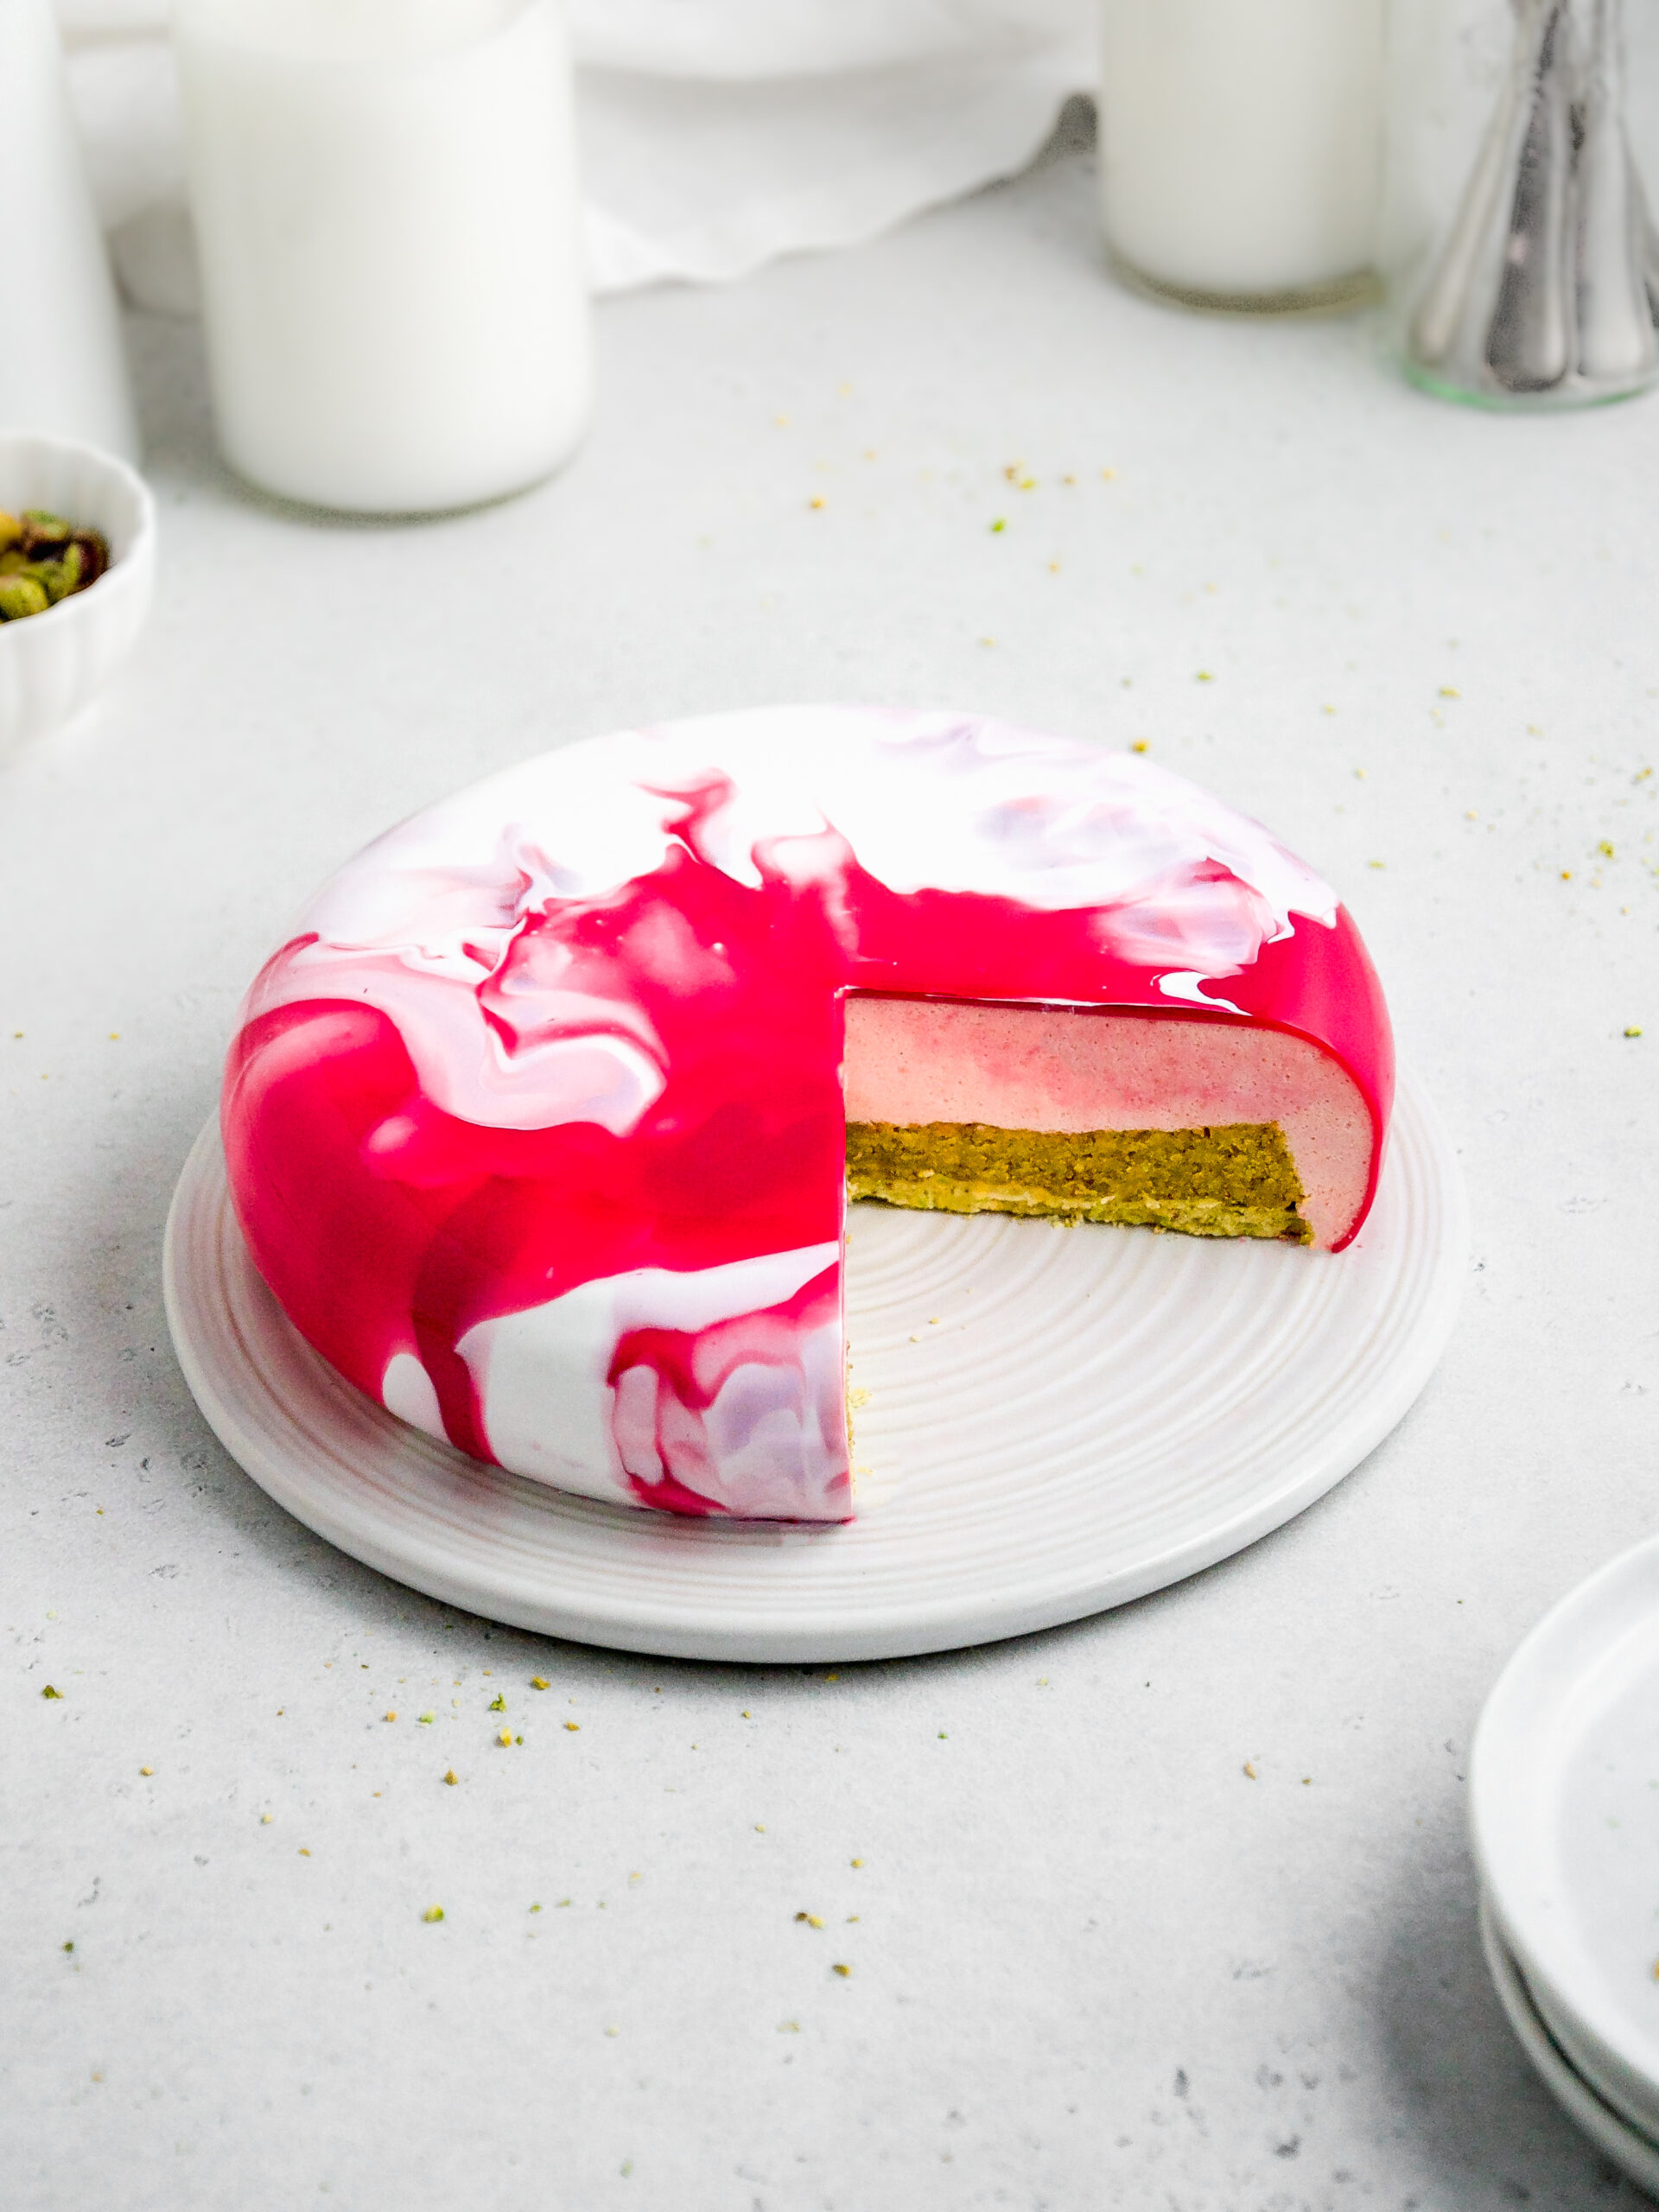 How to Make Mirror Glaze Cakes - Baking with Blondie